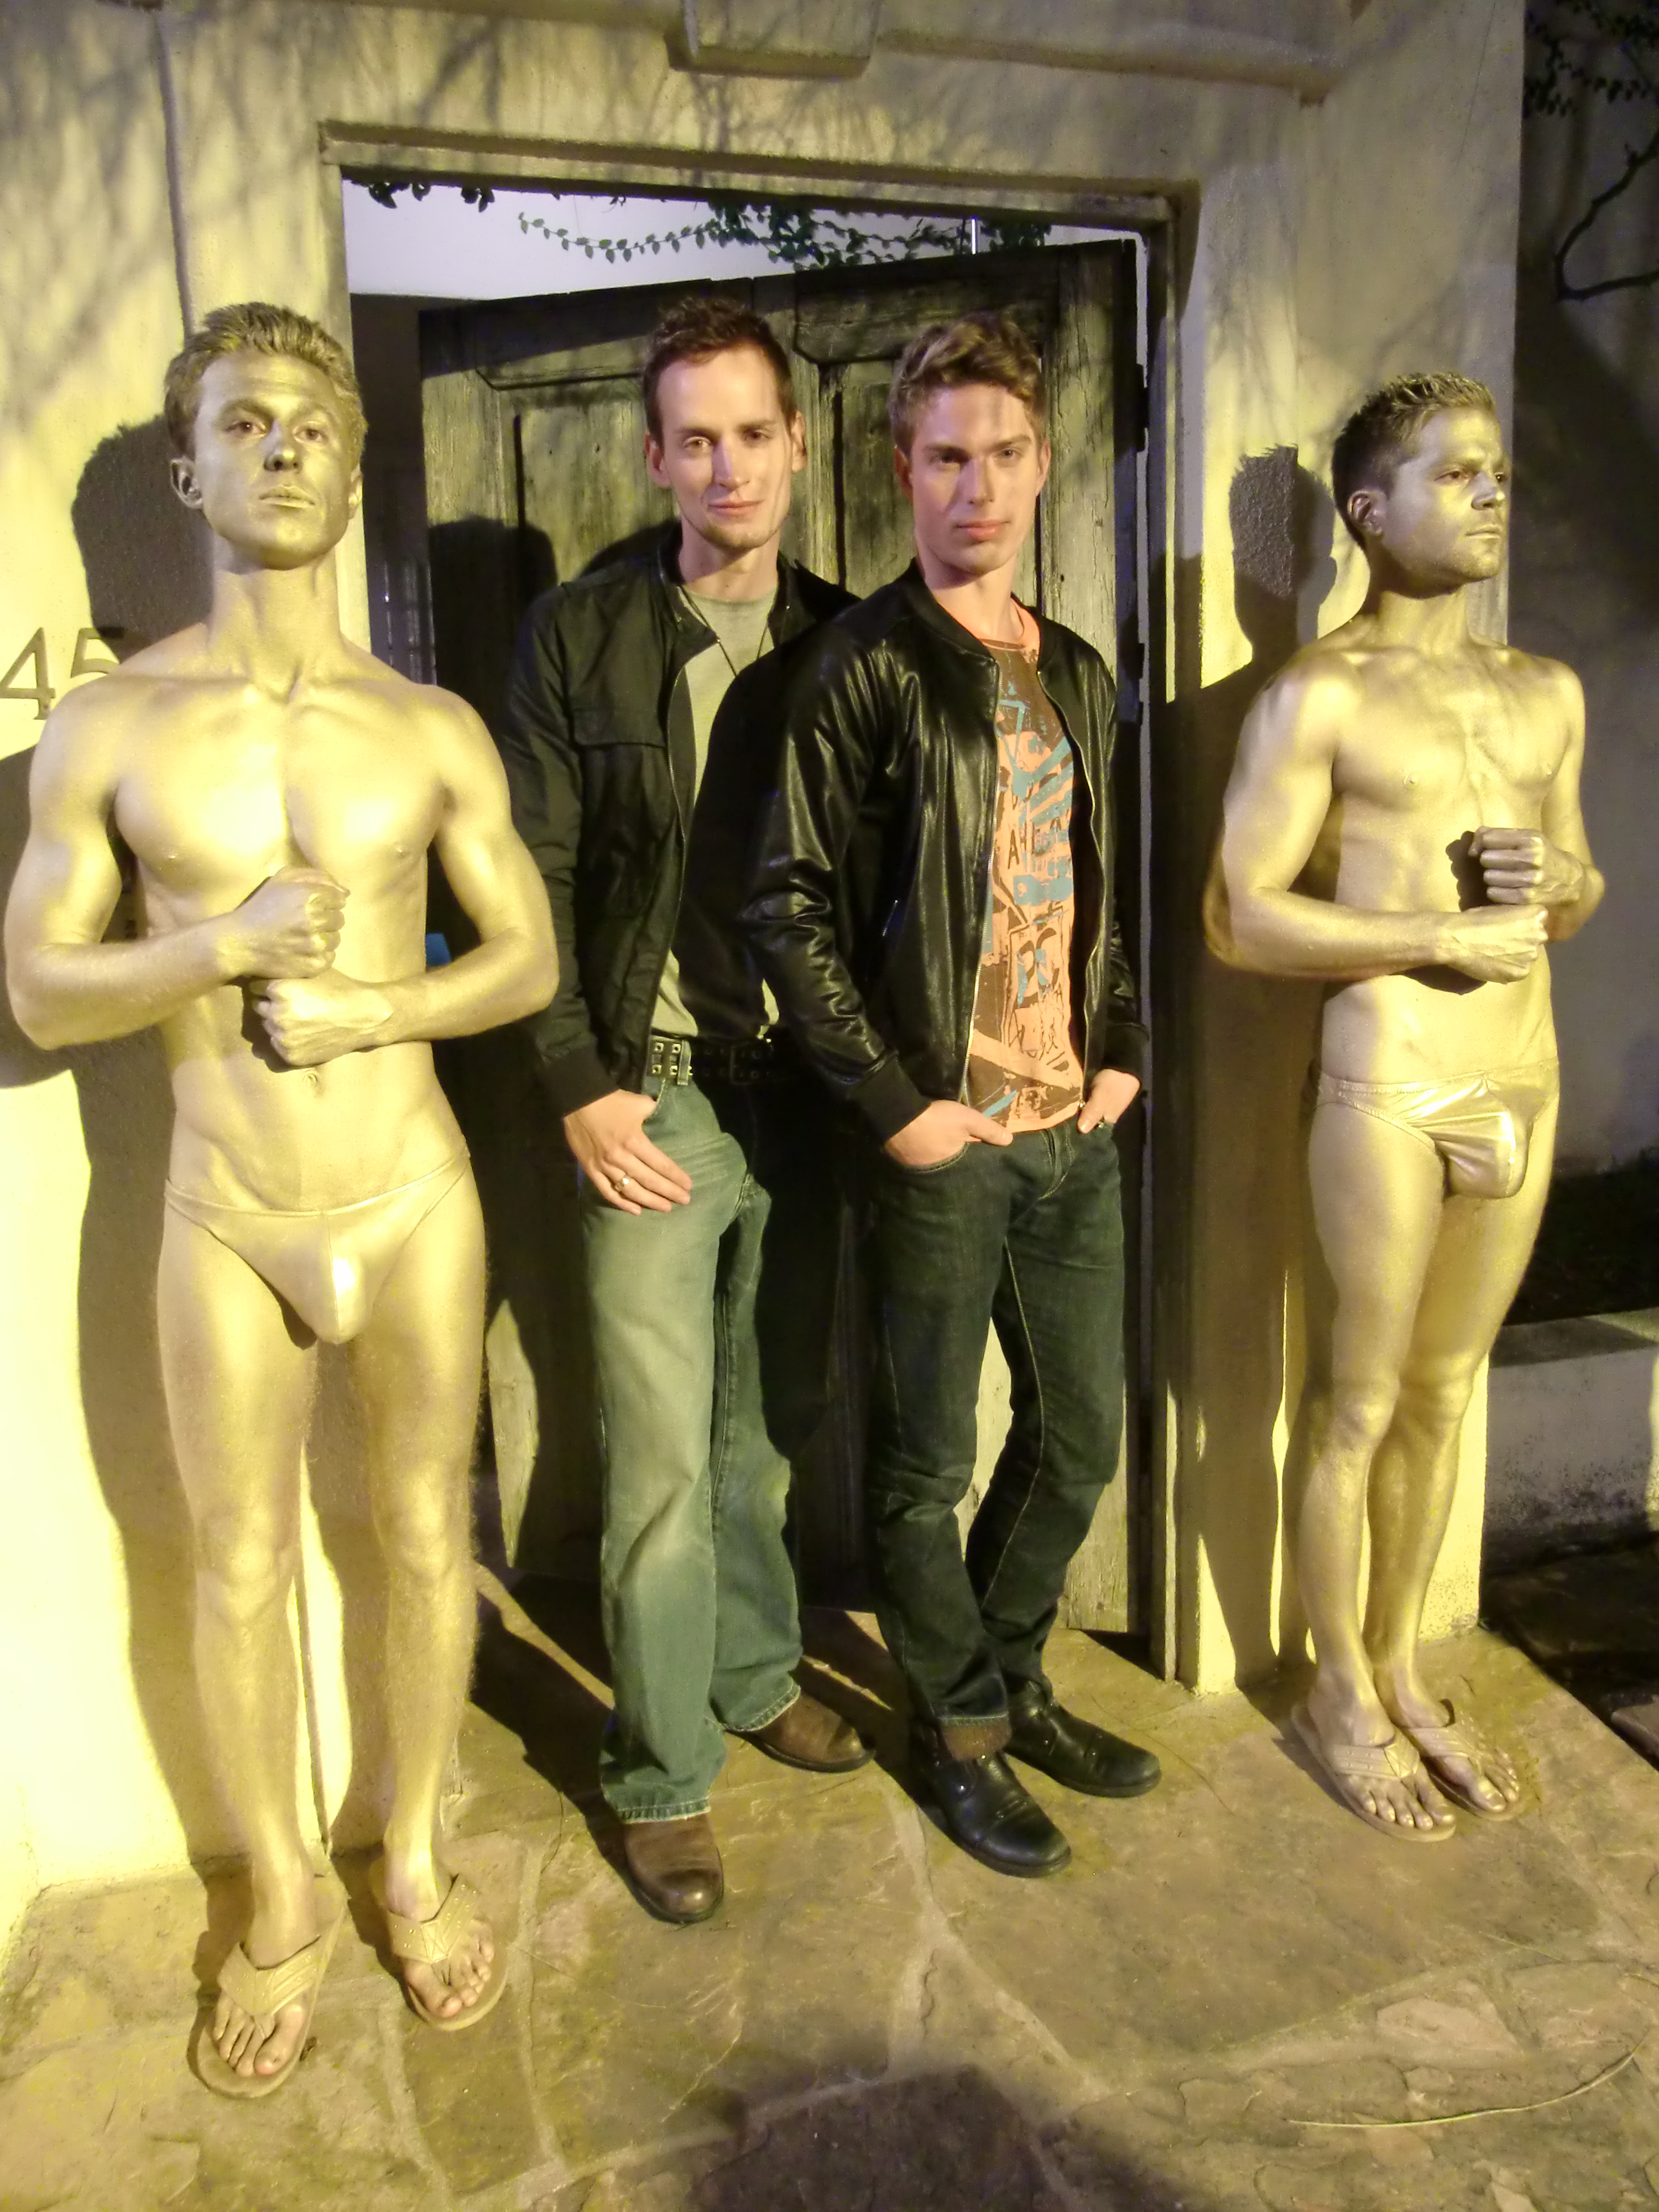 Casper Andreas (Nick) and Matthew Ludwinski (Adam) with Golden Statues on the set of 